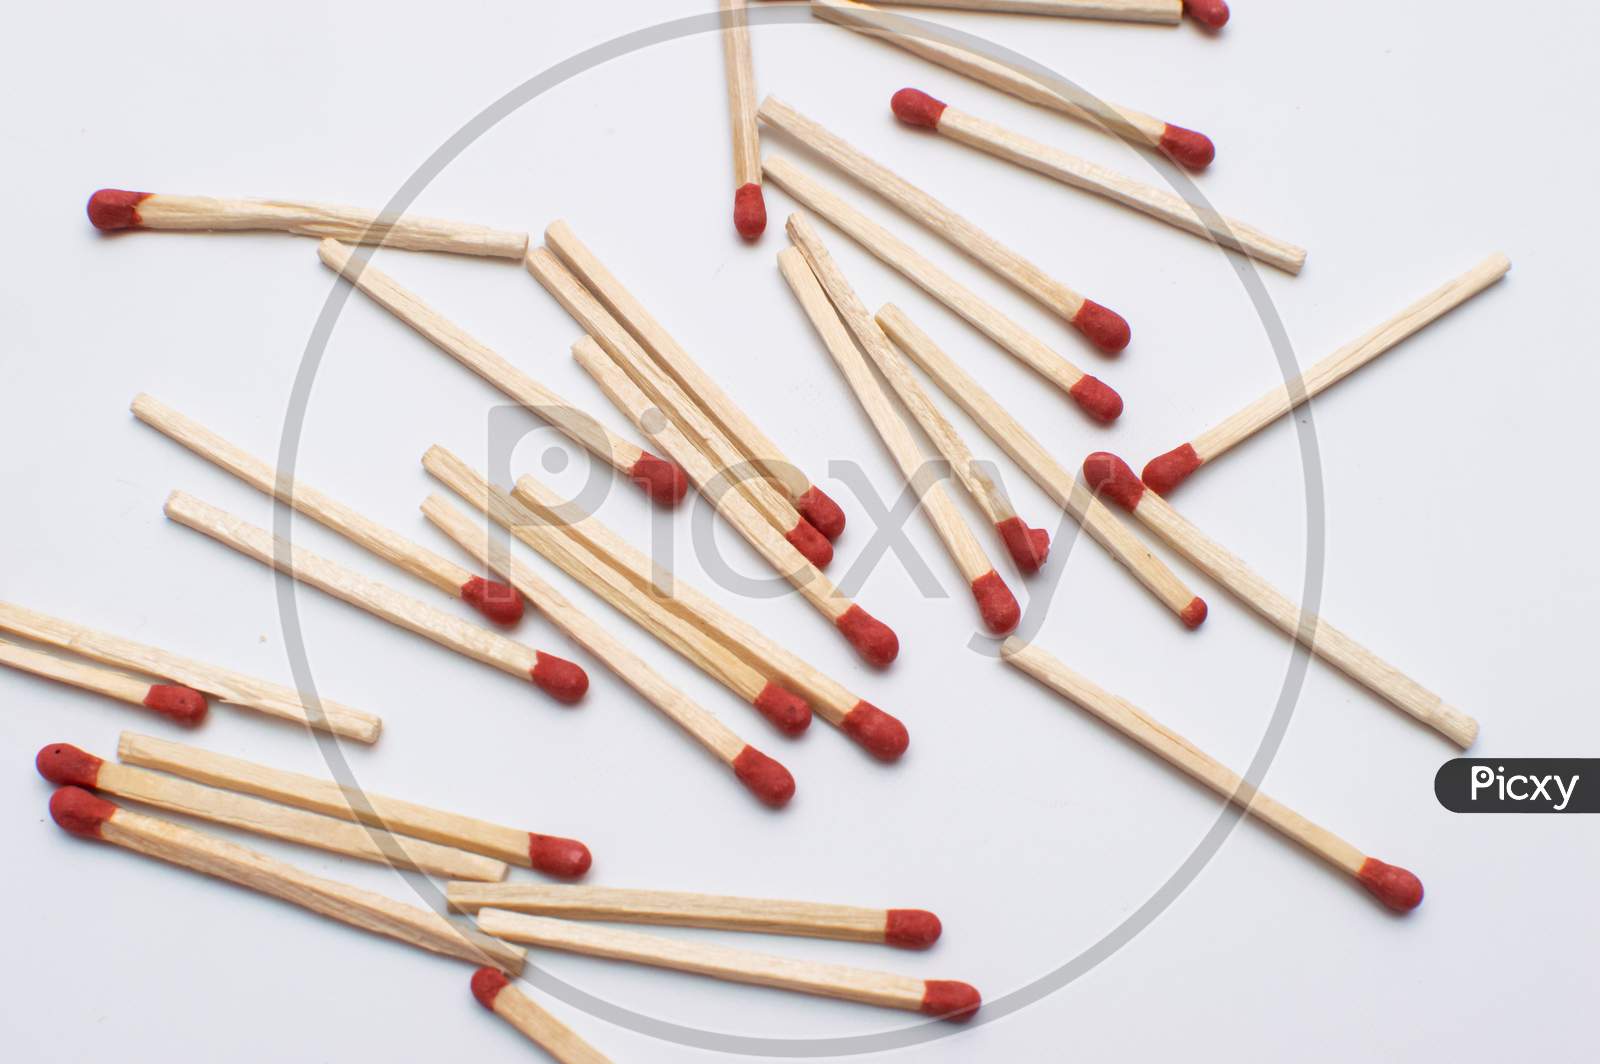 Matchsticks on a white background with spaces in between